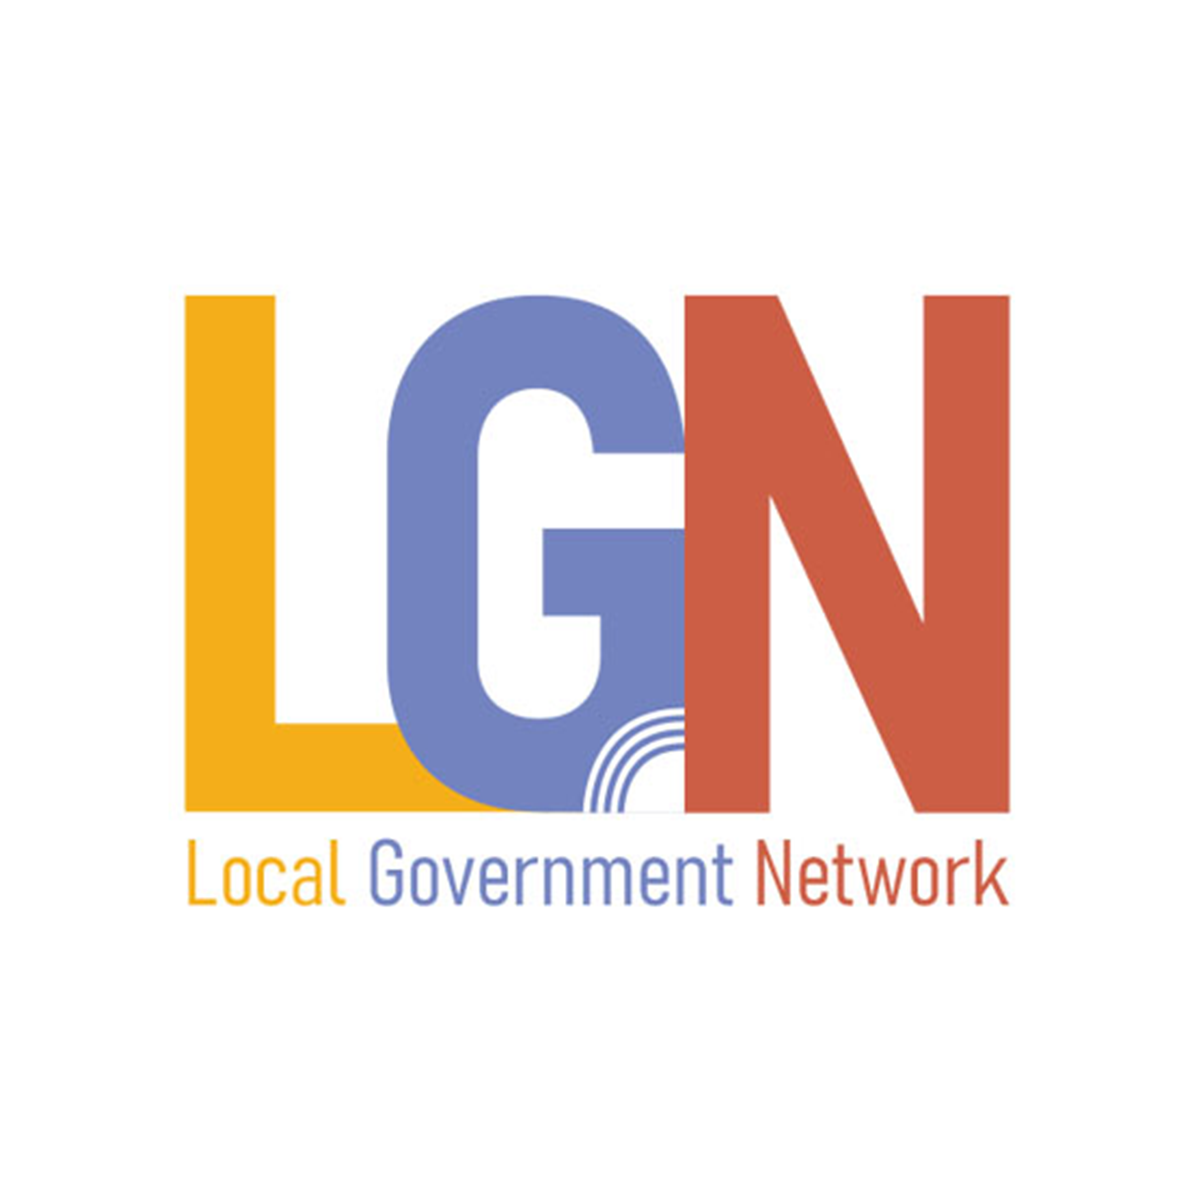 Local Government Network